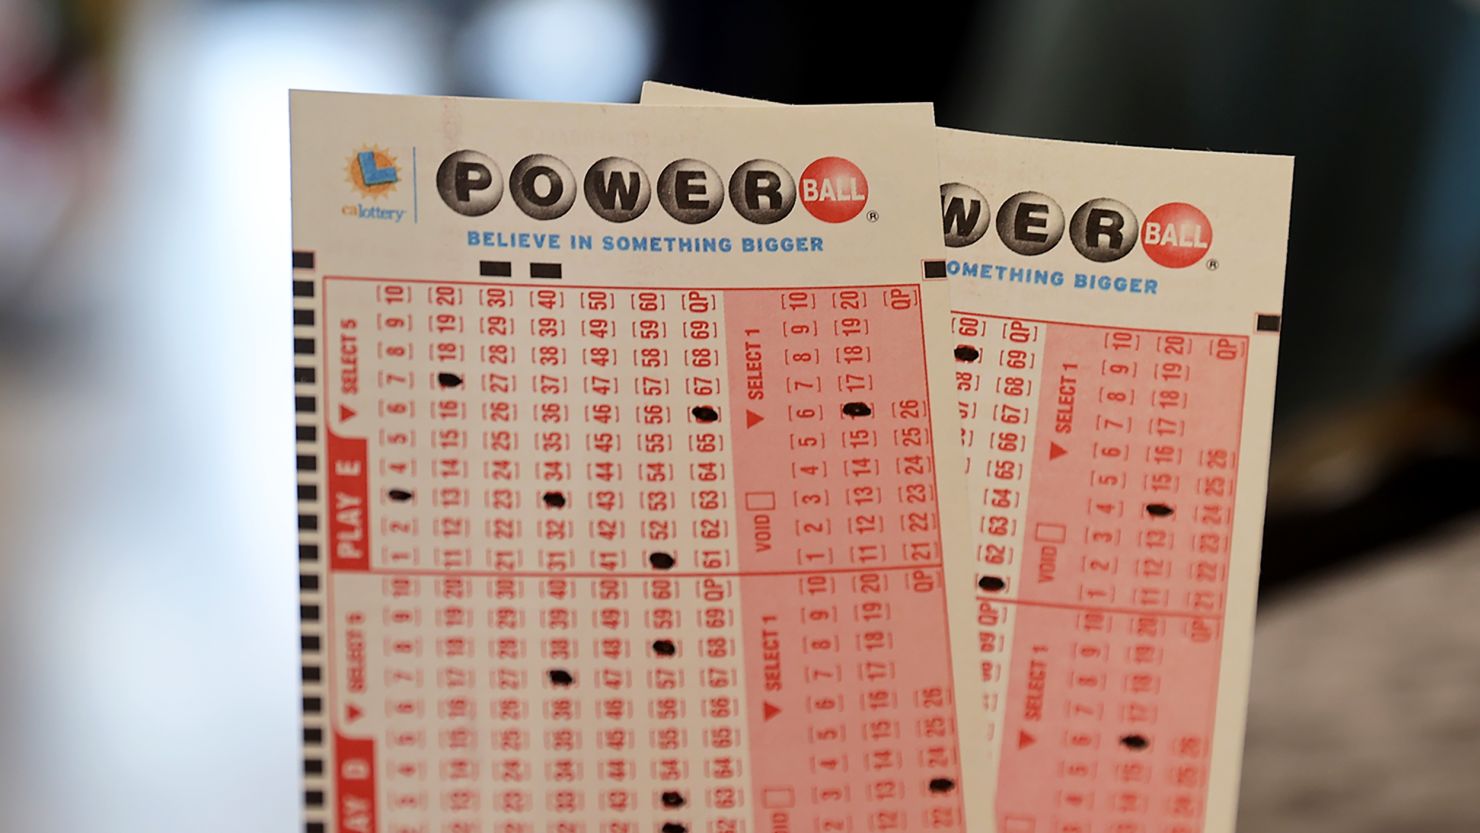 State run lotteries market to low income Black and brown communities